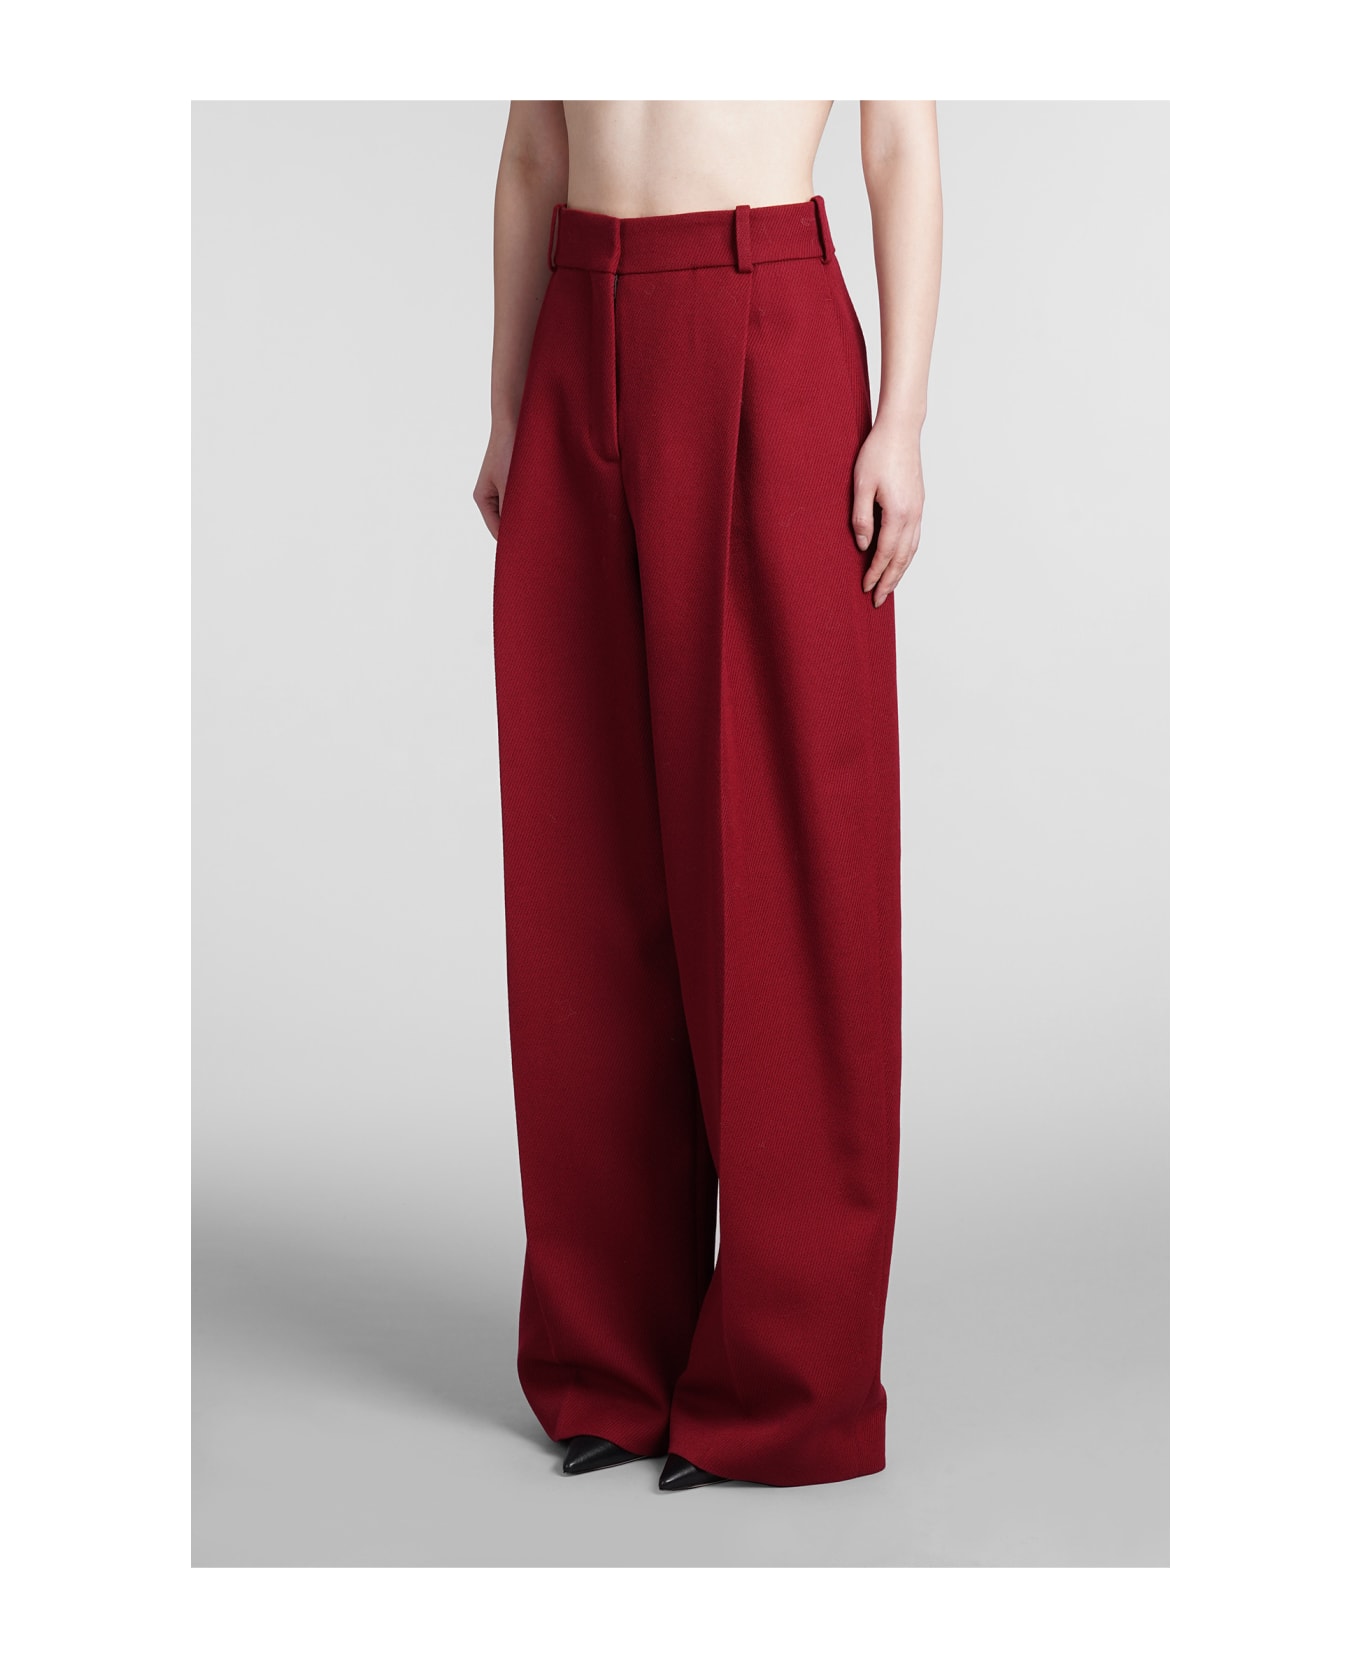 Tommy Hilfiger Pants In Bordeaux Wool - Red